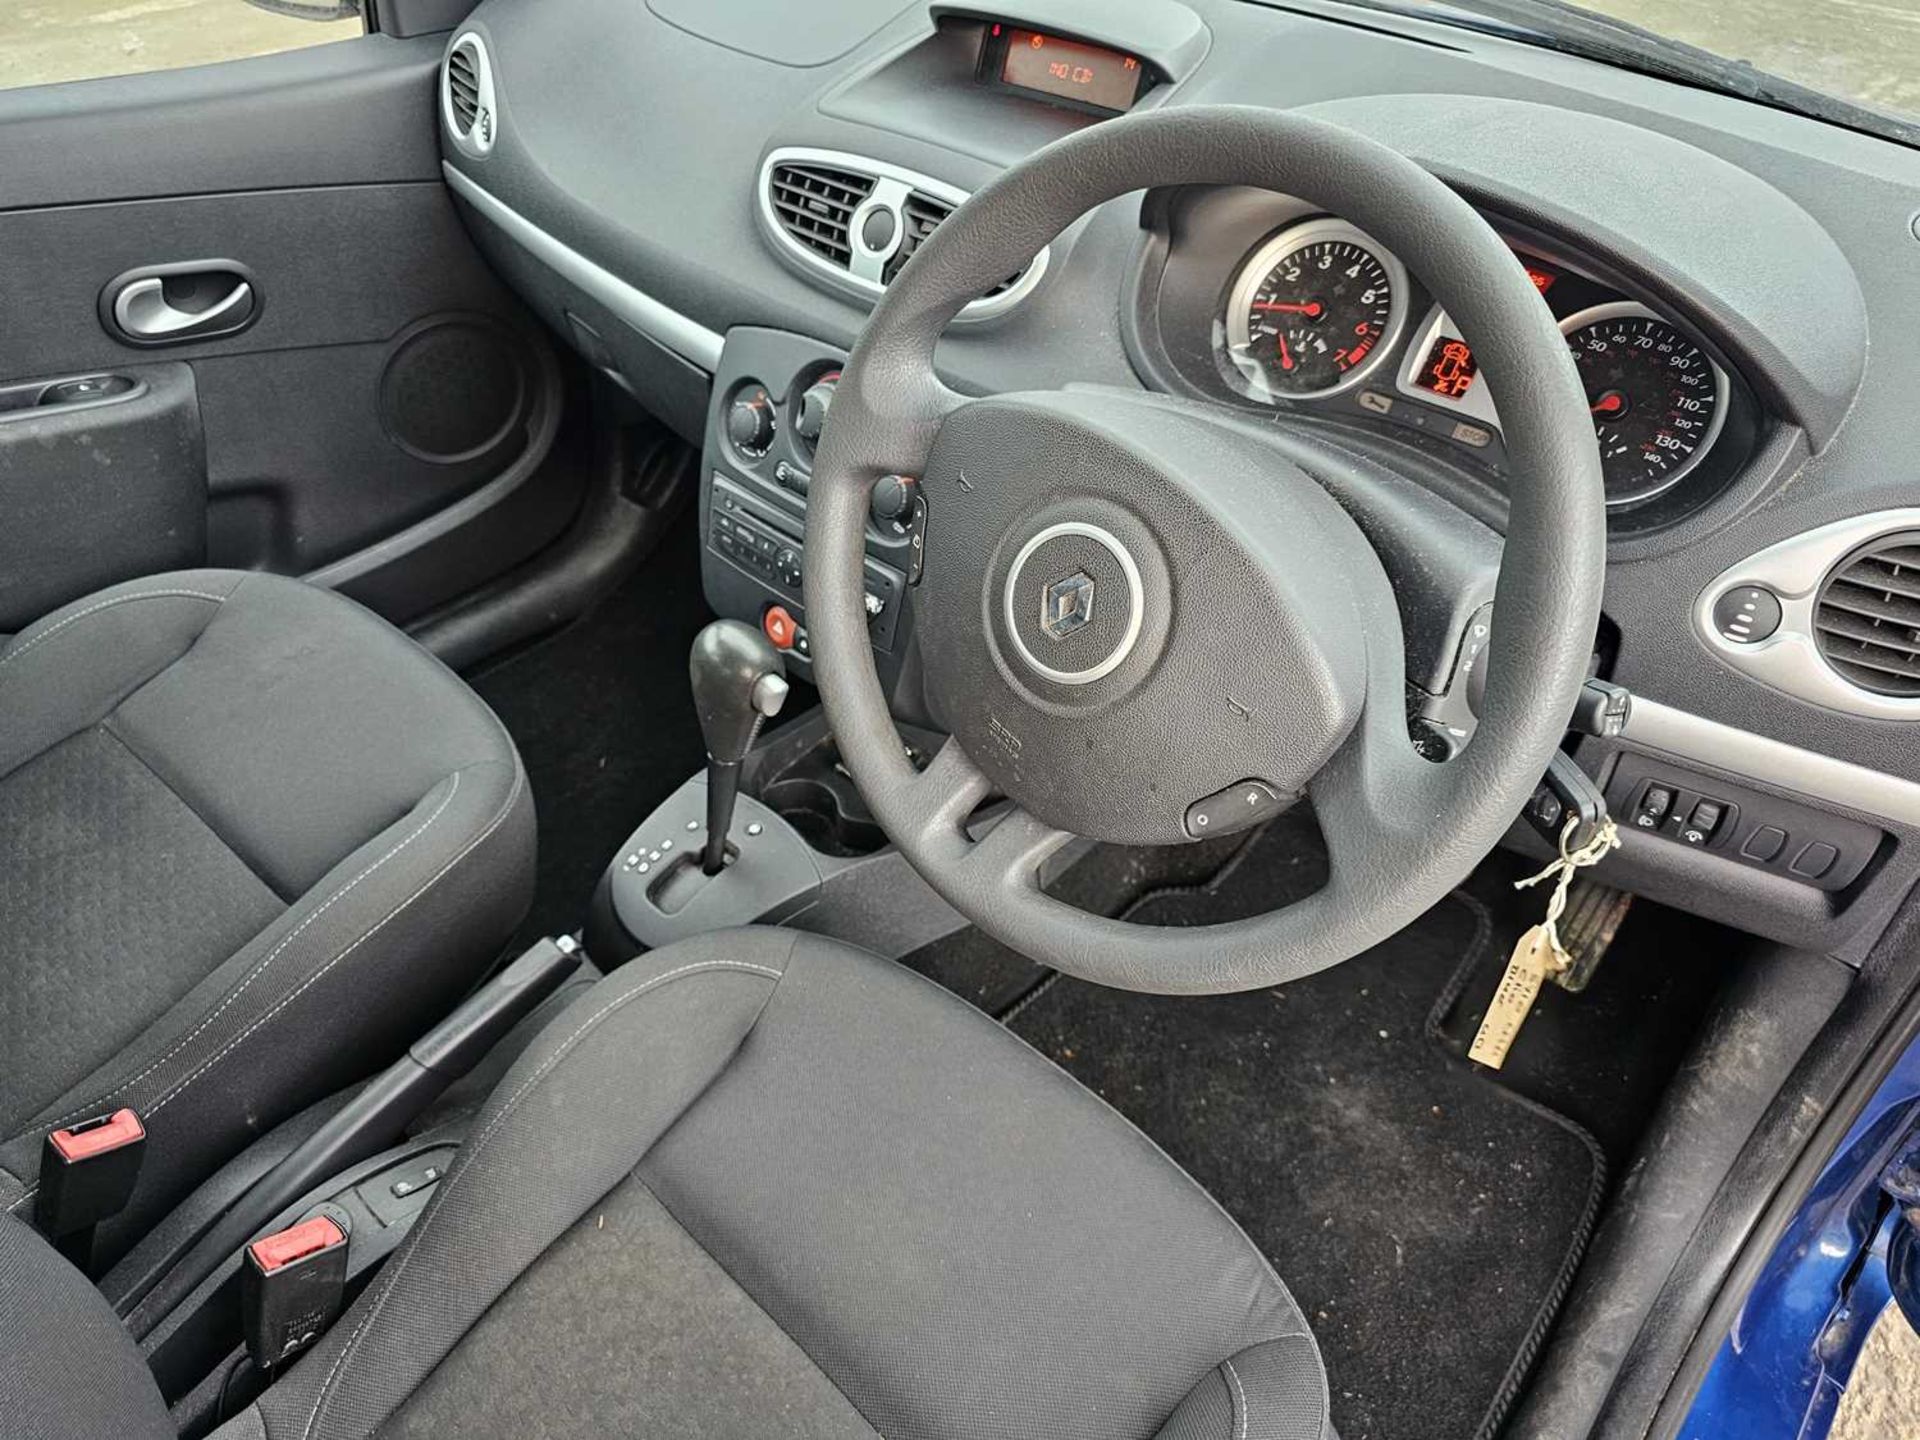 2010 Renault Clio Auto, A/C (Reg. Docs. Available, Tested 01/25) - Image 22 of 28